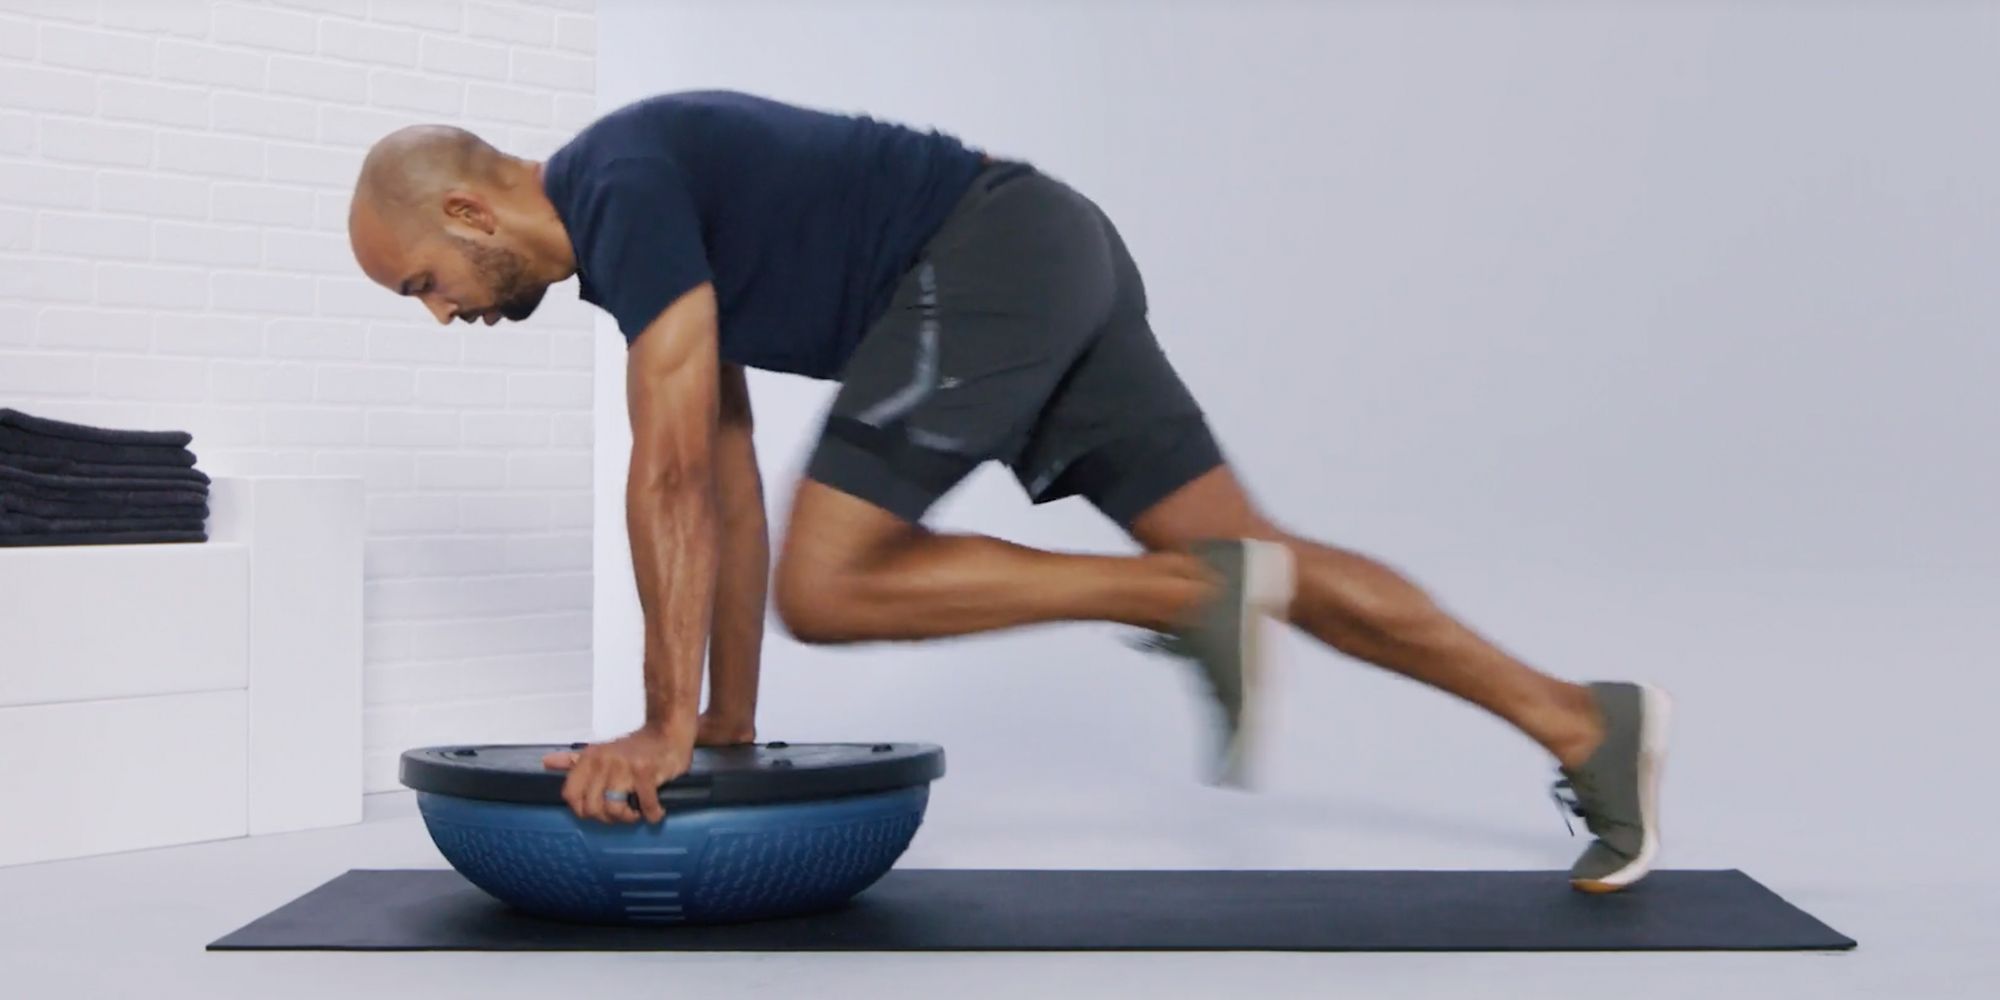 Build Balance And Stability With This BOSU Trainer Workout With Frank  Baptiste